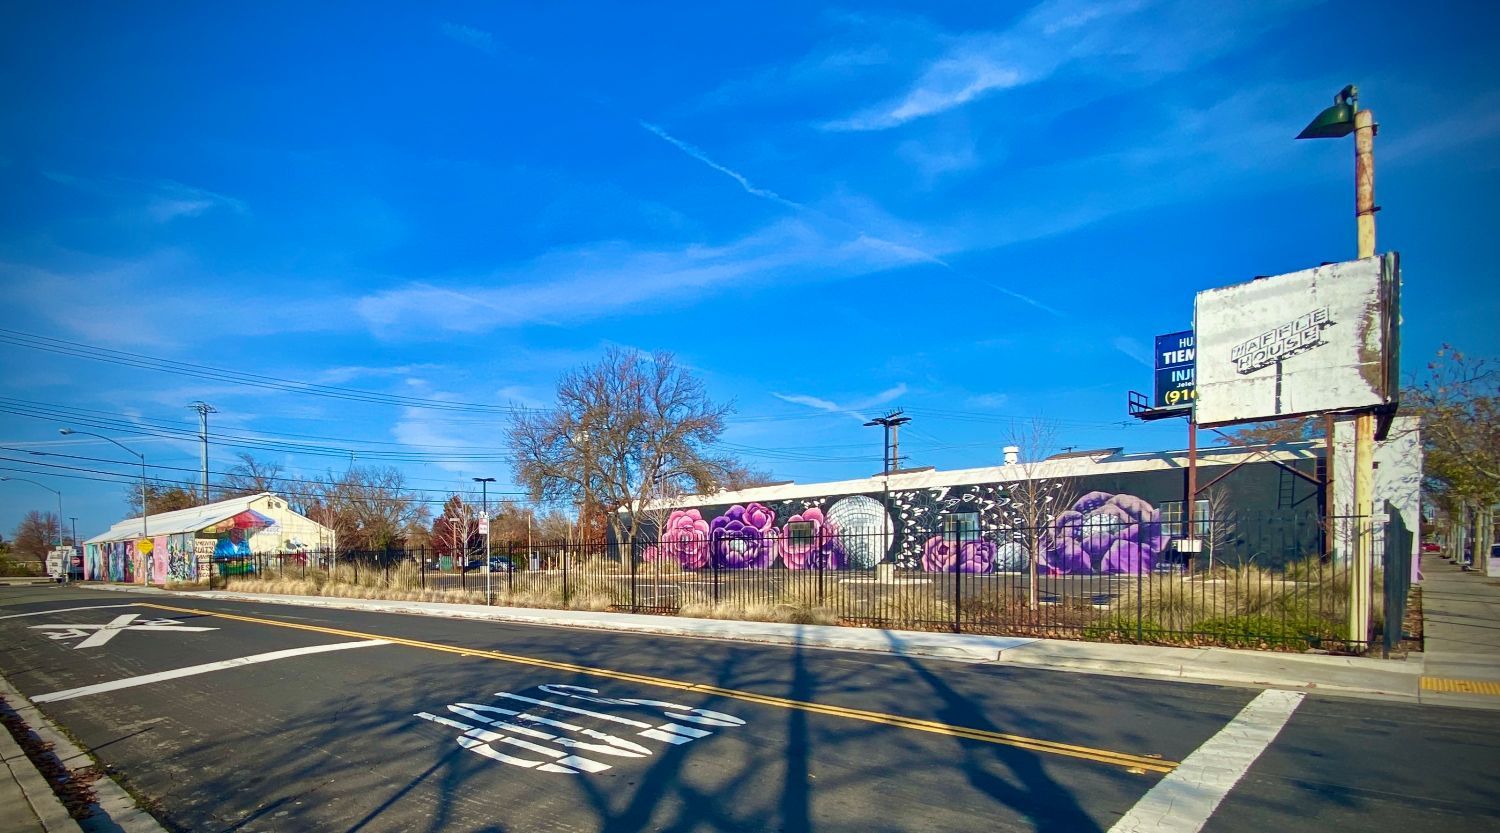 Image of Del Paso Boulevard featuring a building mural